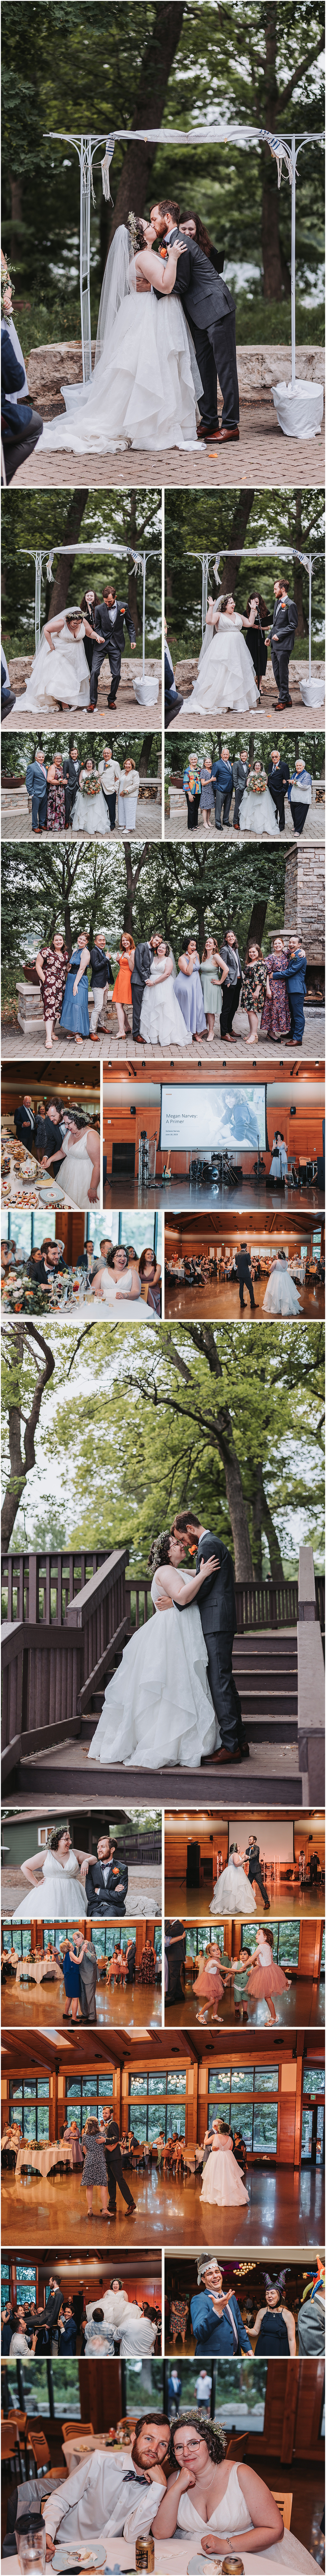 Images from a silverwood park wedding. 